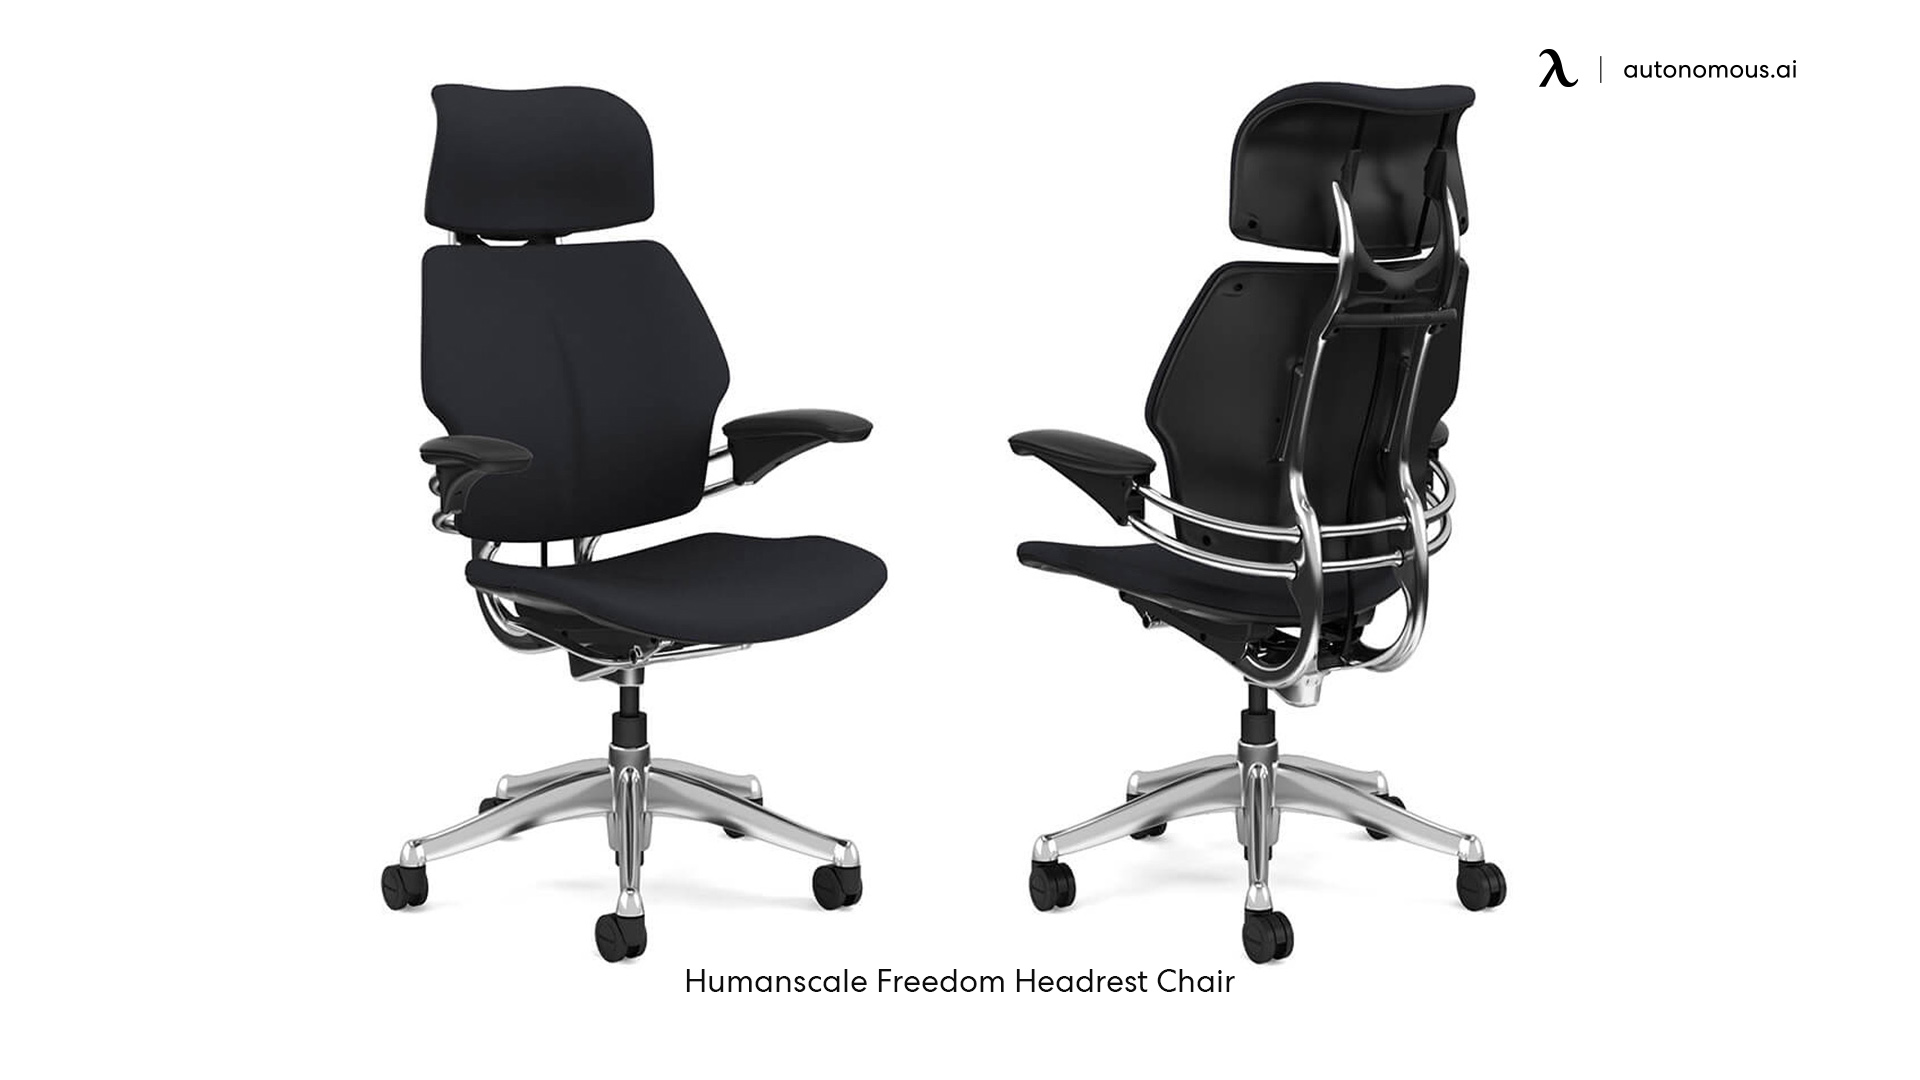 Humanscale best office chair for sciatica